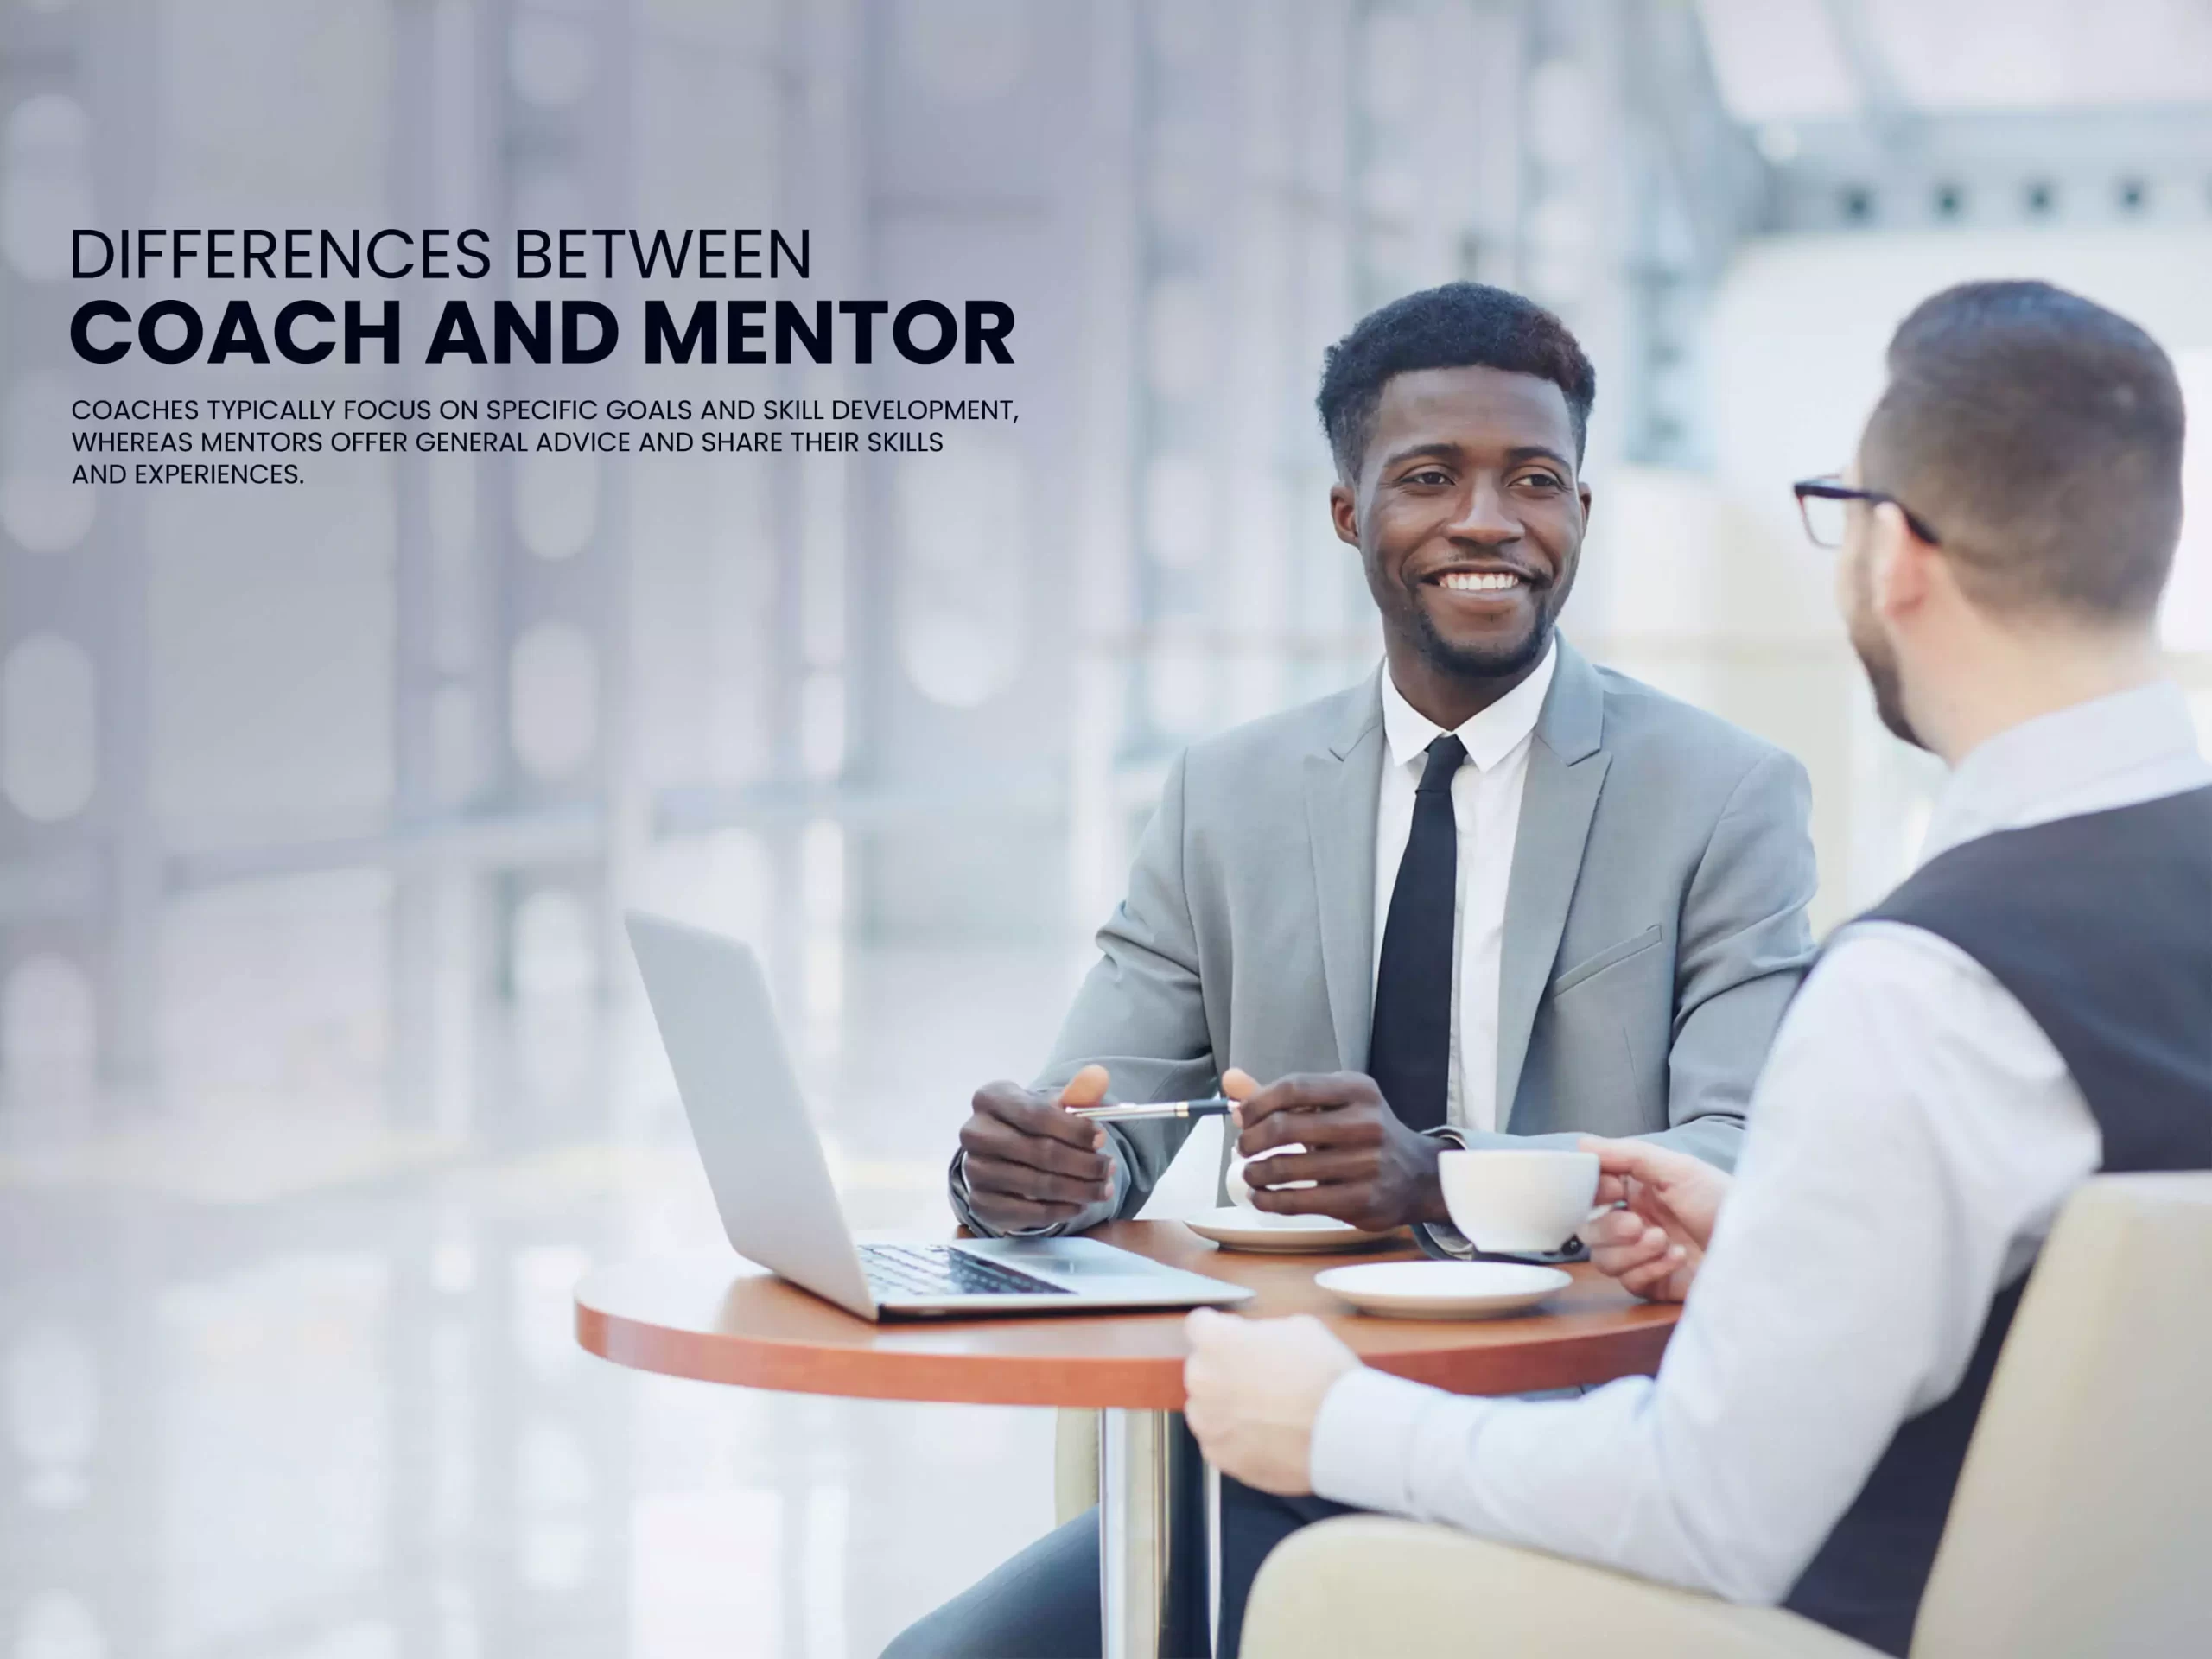 Differences Between Coach and Mentor